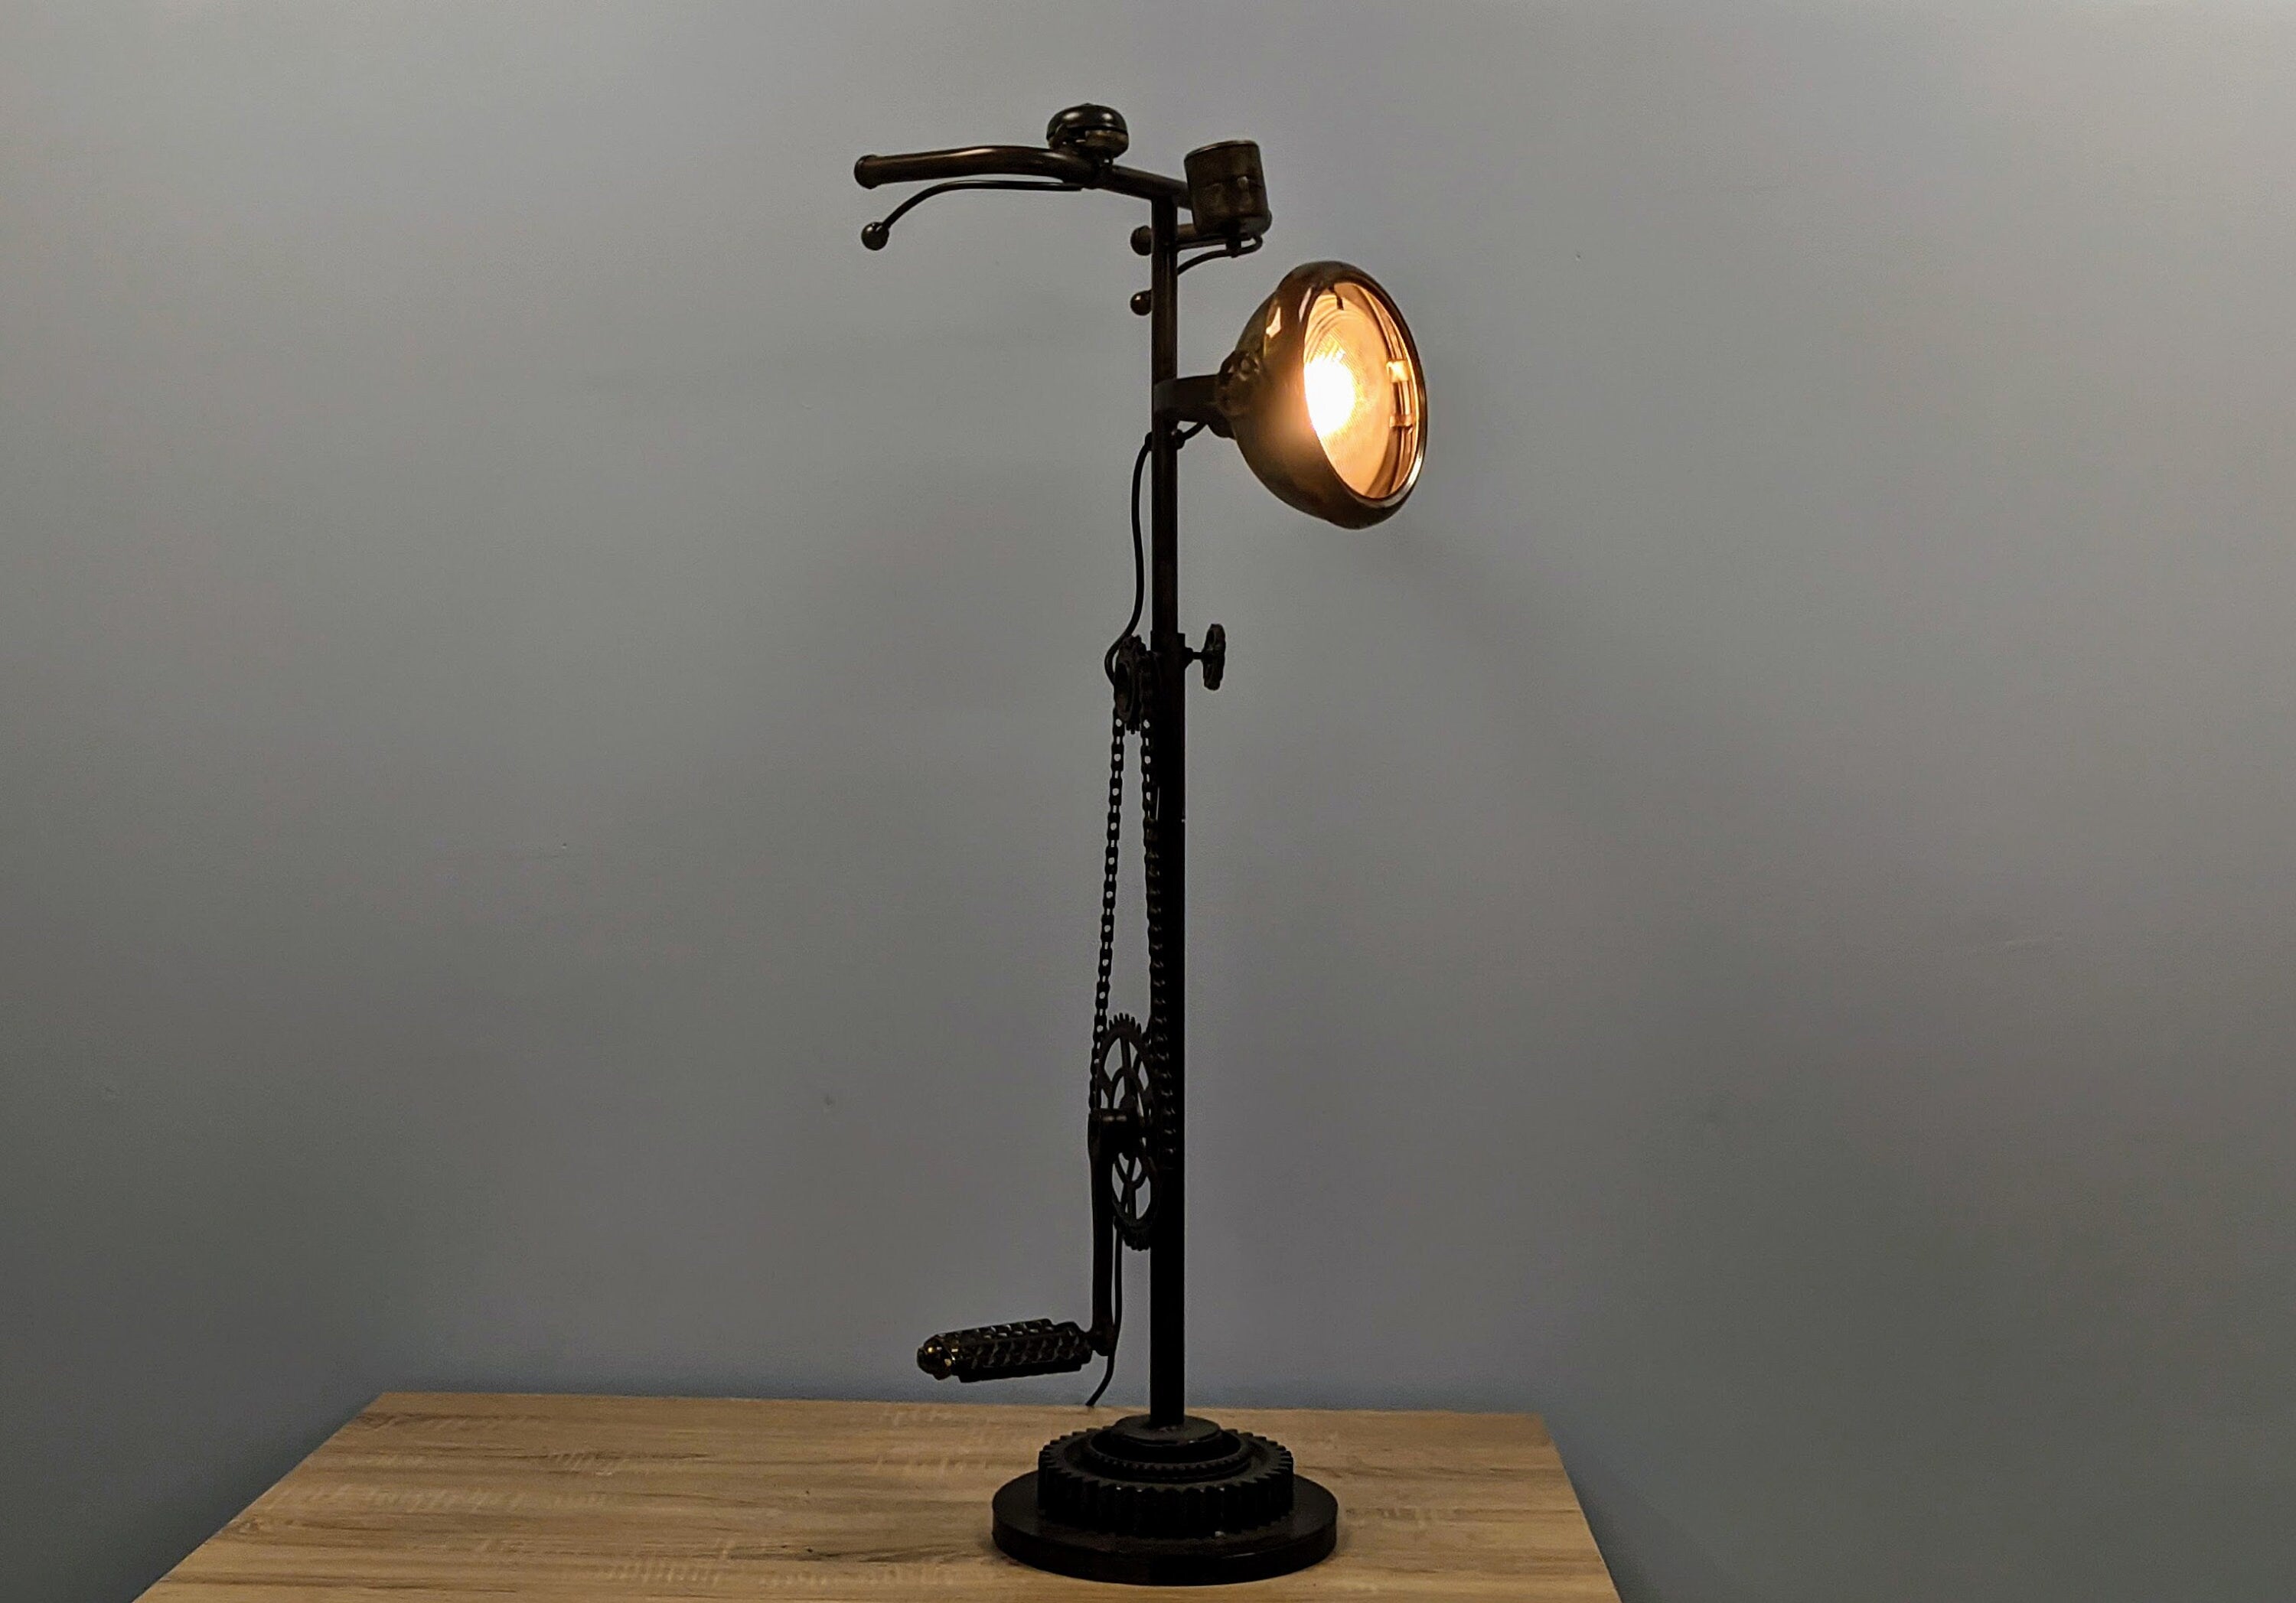 Water Pipe Floor Lamp serving as a stylish standing lamp, showcasing an industrial floor lamp design made from authentic water pipes.